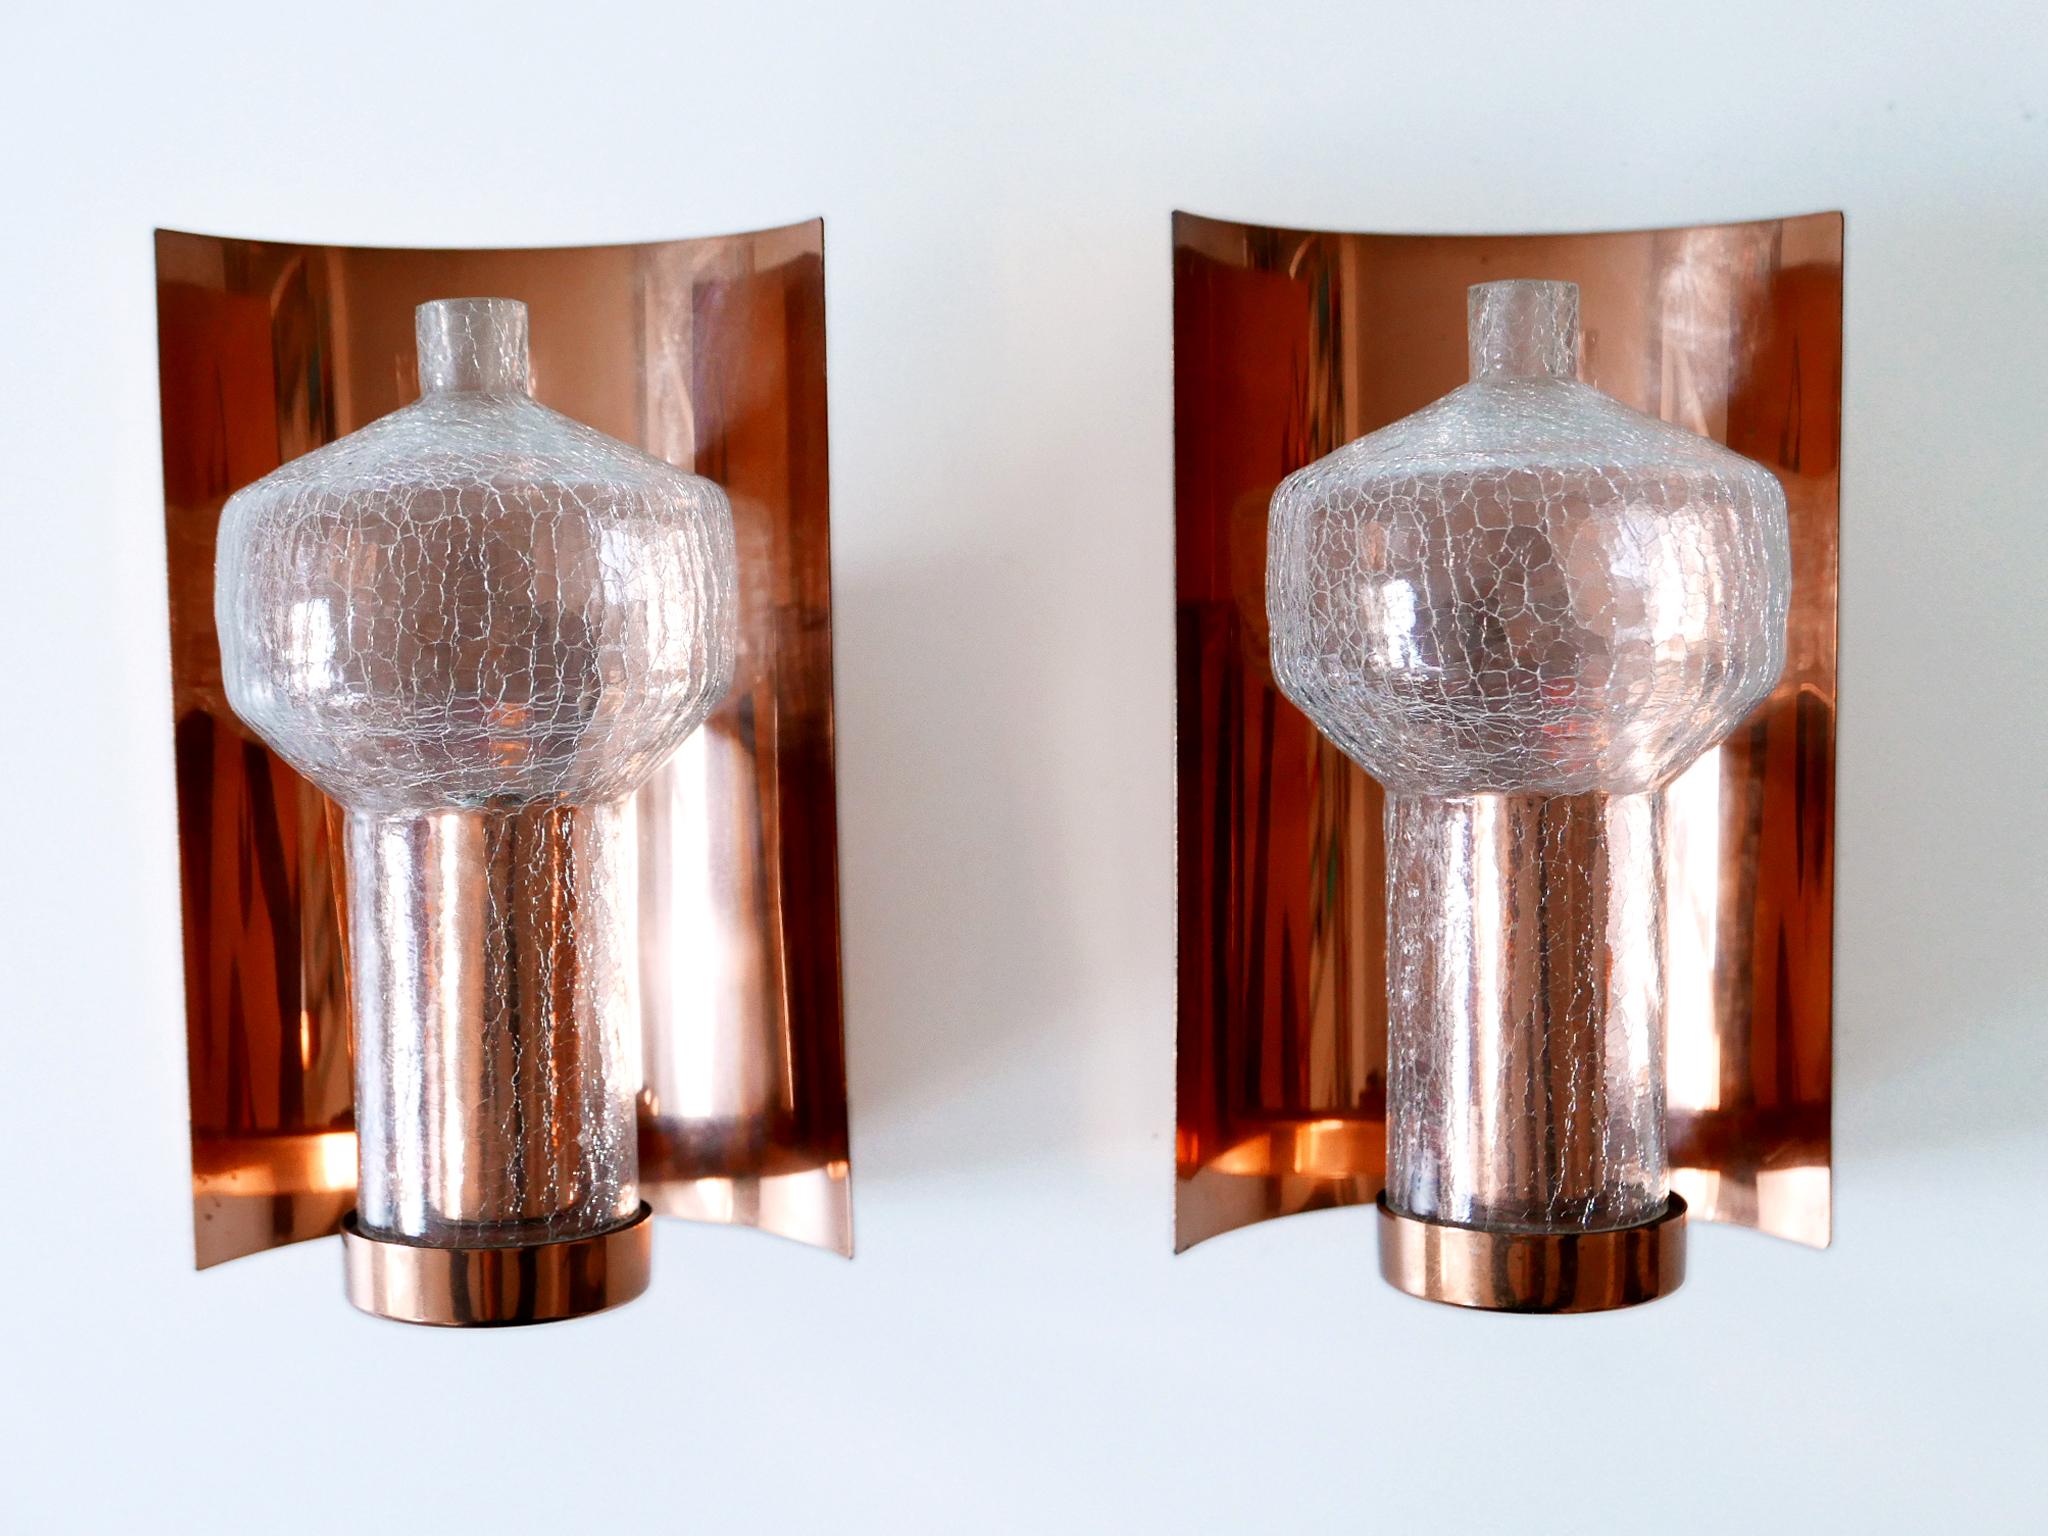 German Set of Two Mid-Century Modern Copper & Glass Sconces by Kaiser Leuchten, 1960s For Sale